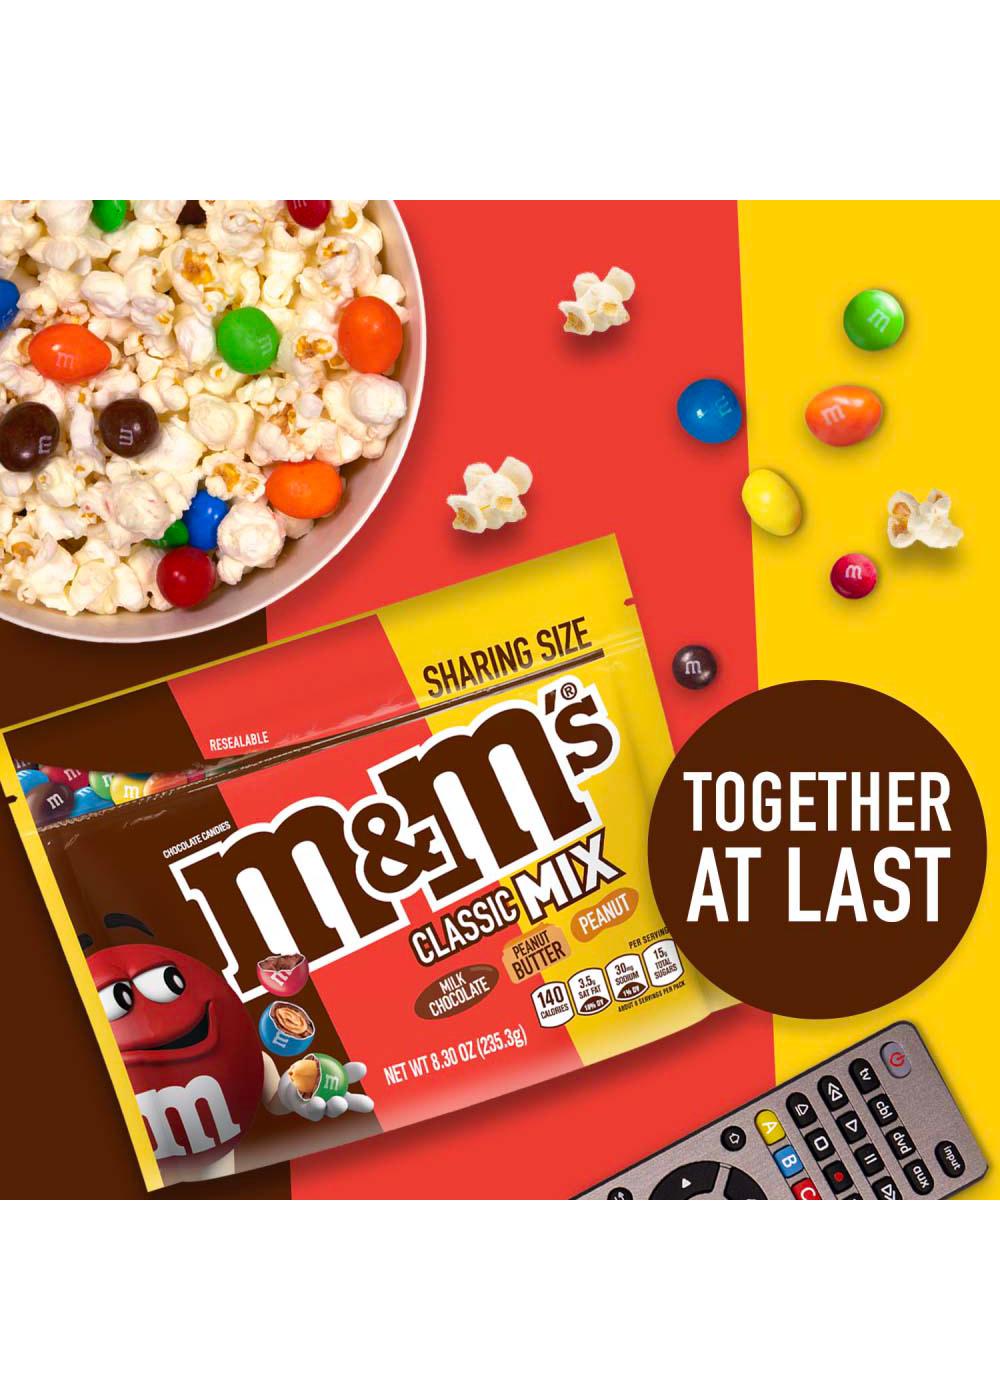 M&M'S Classic Mix Chocolate Candy - Sharing Size; image 4 of 5